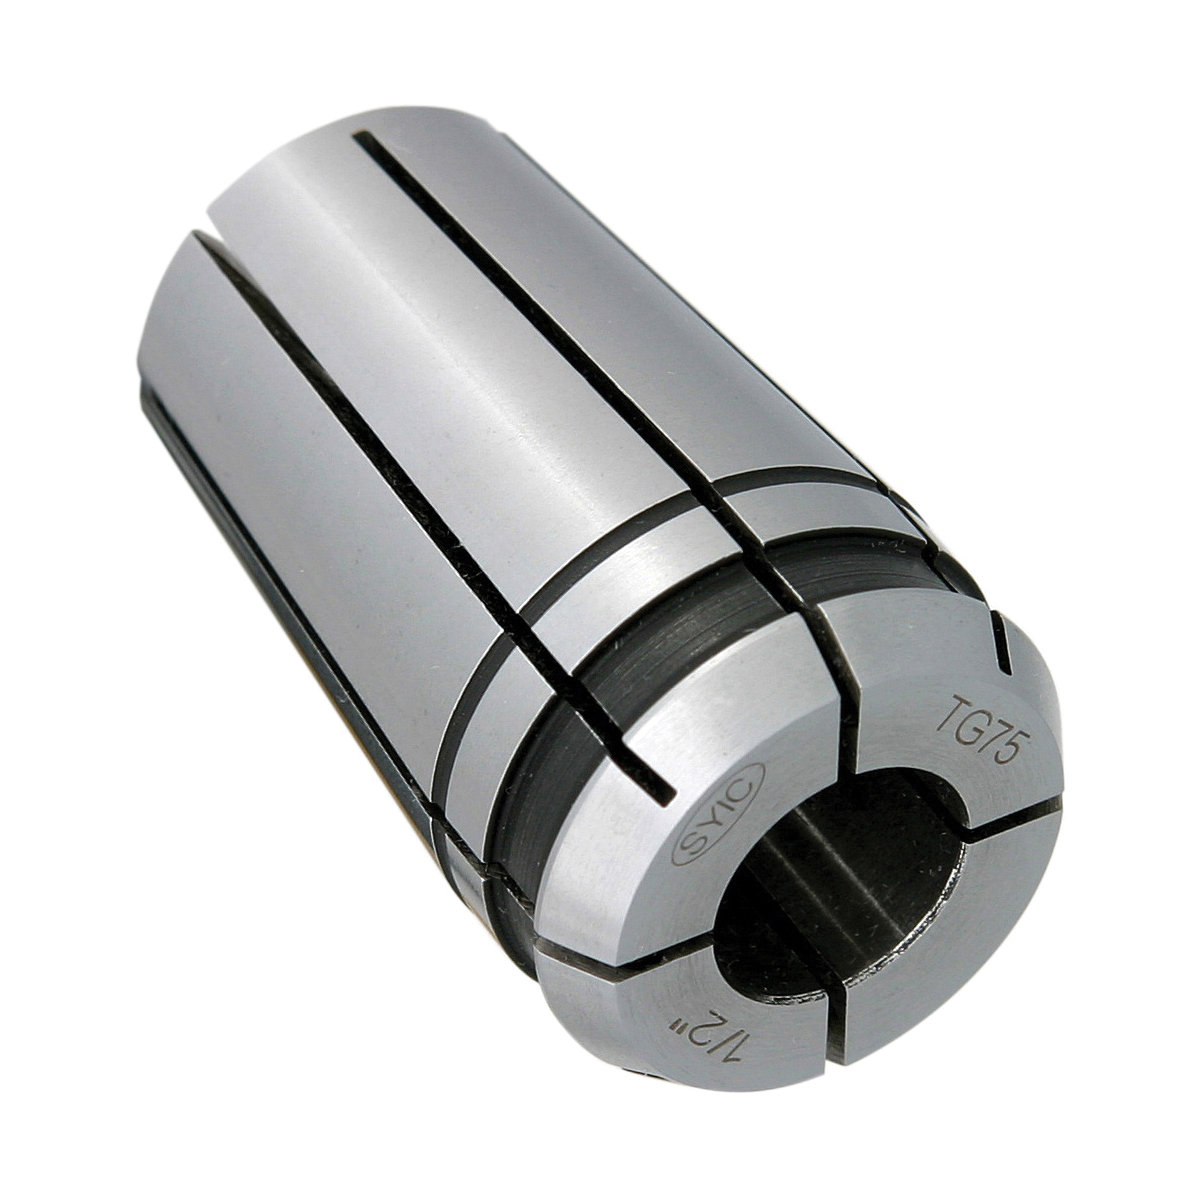 TG75 45/64" COLLET